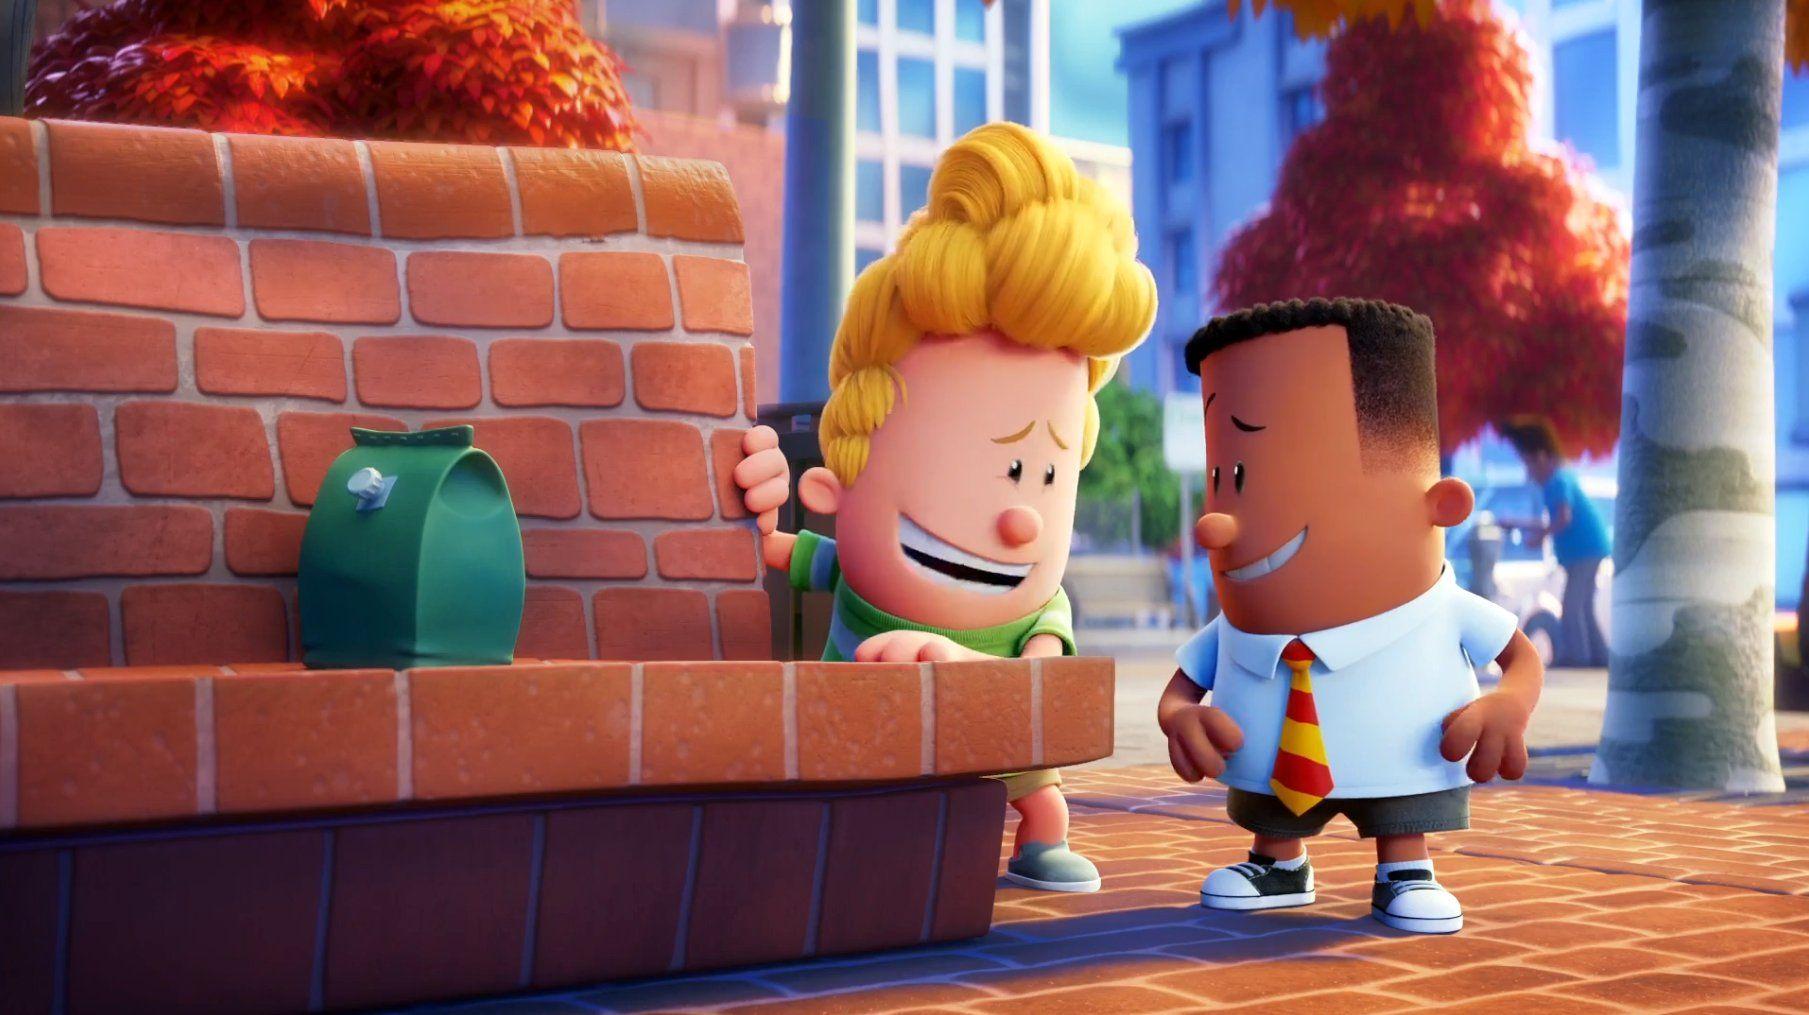 Dreamworks 6: Captain Underpants: The First Epic Movie